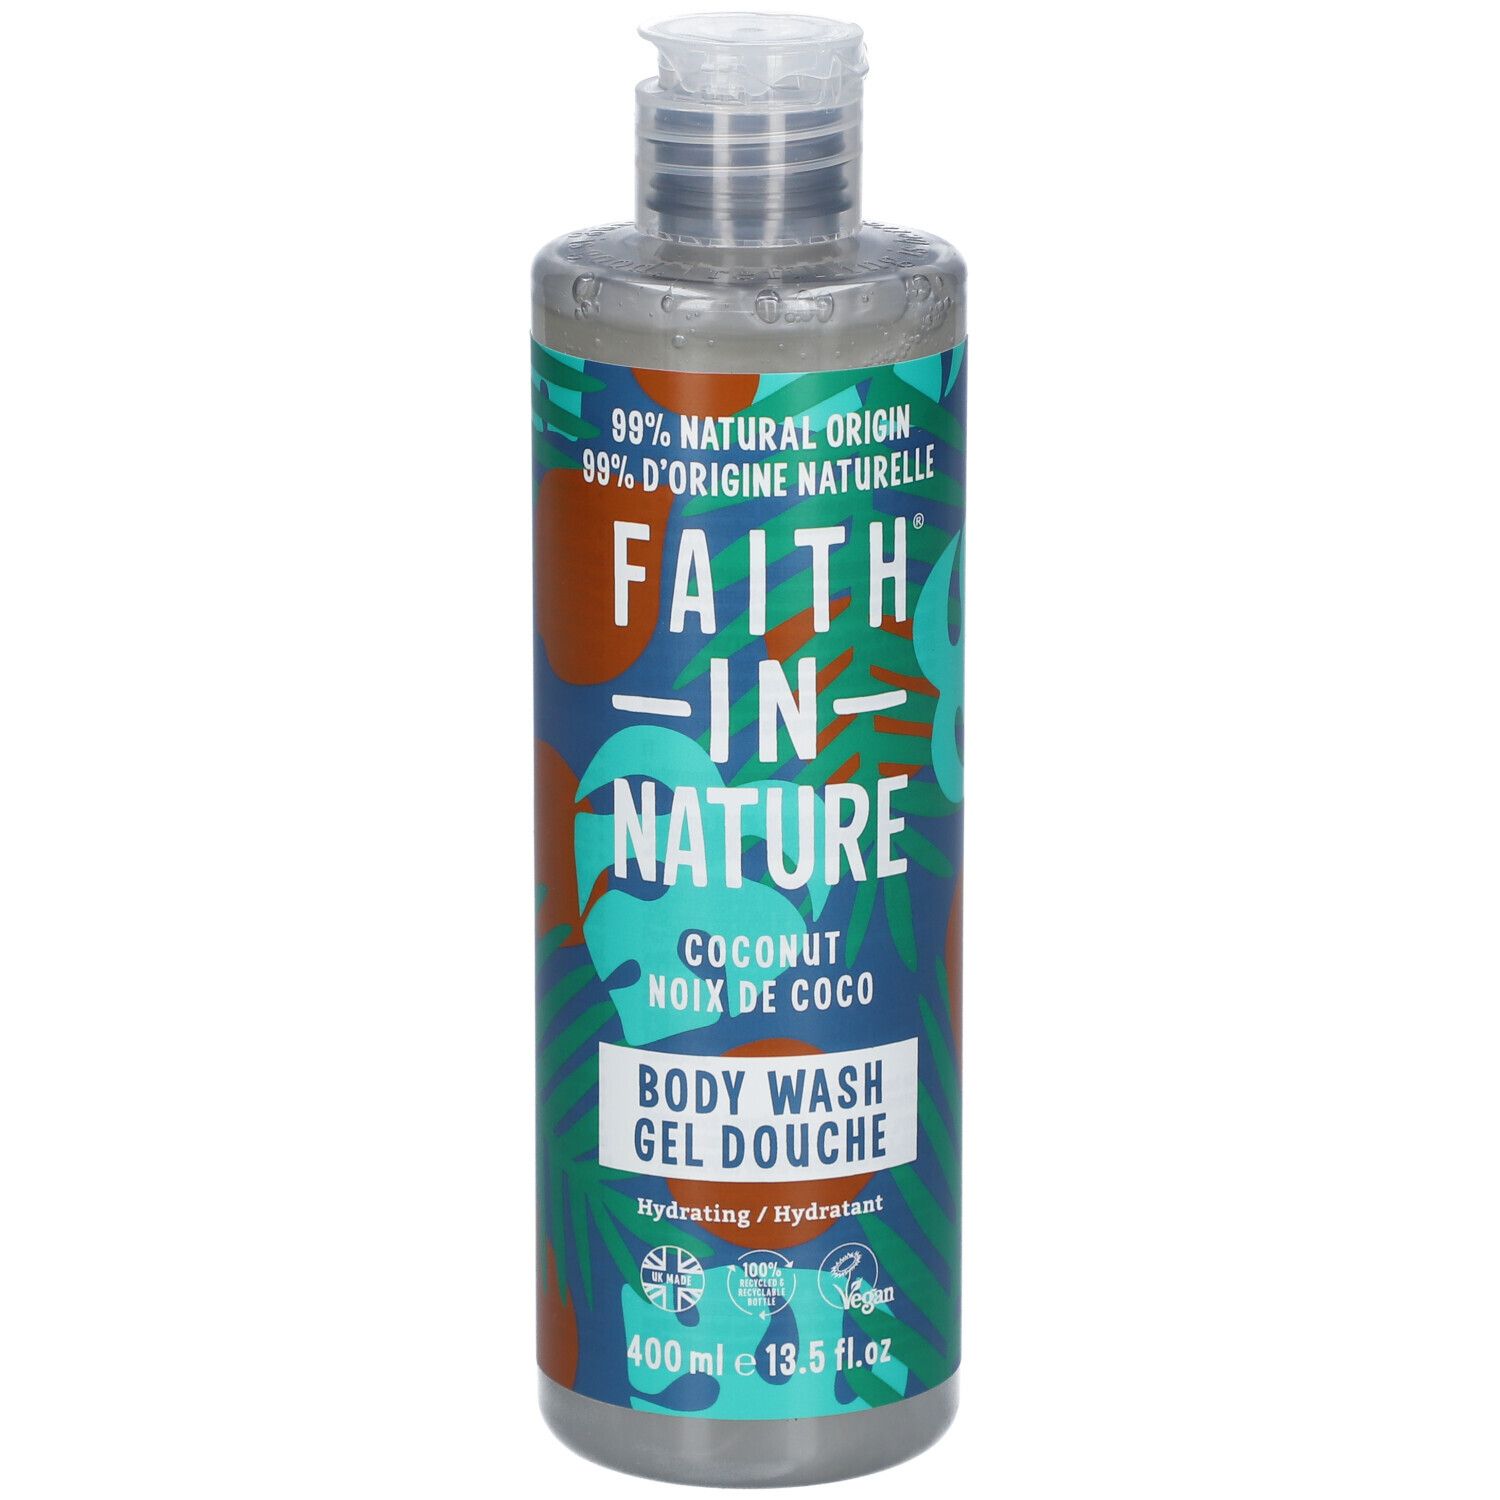 Faith IN Nature Gel douche coco